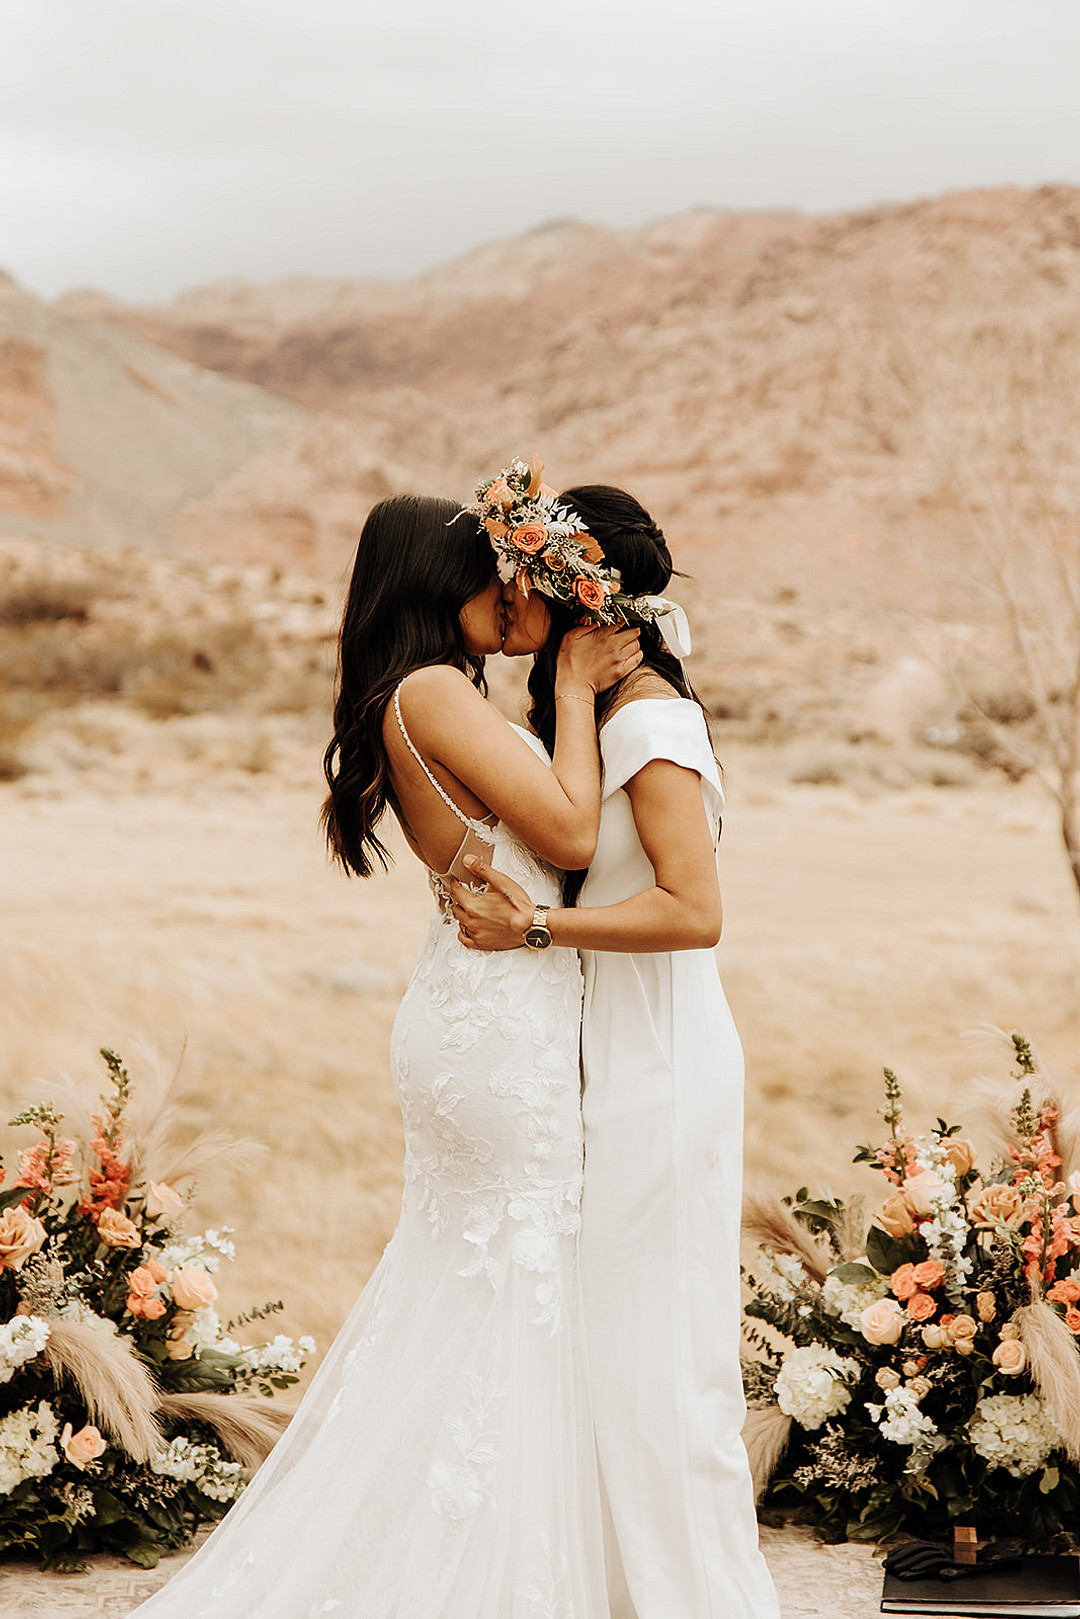 Two brides kiss and embrace at their outdoor desert wedding.